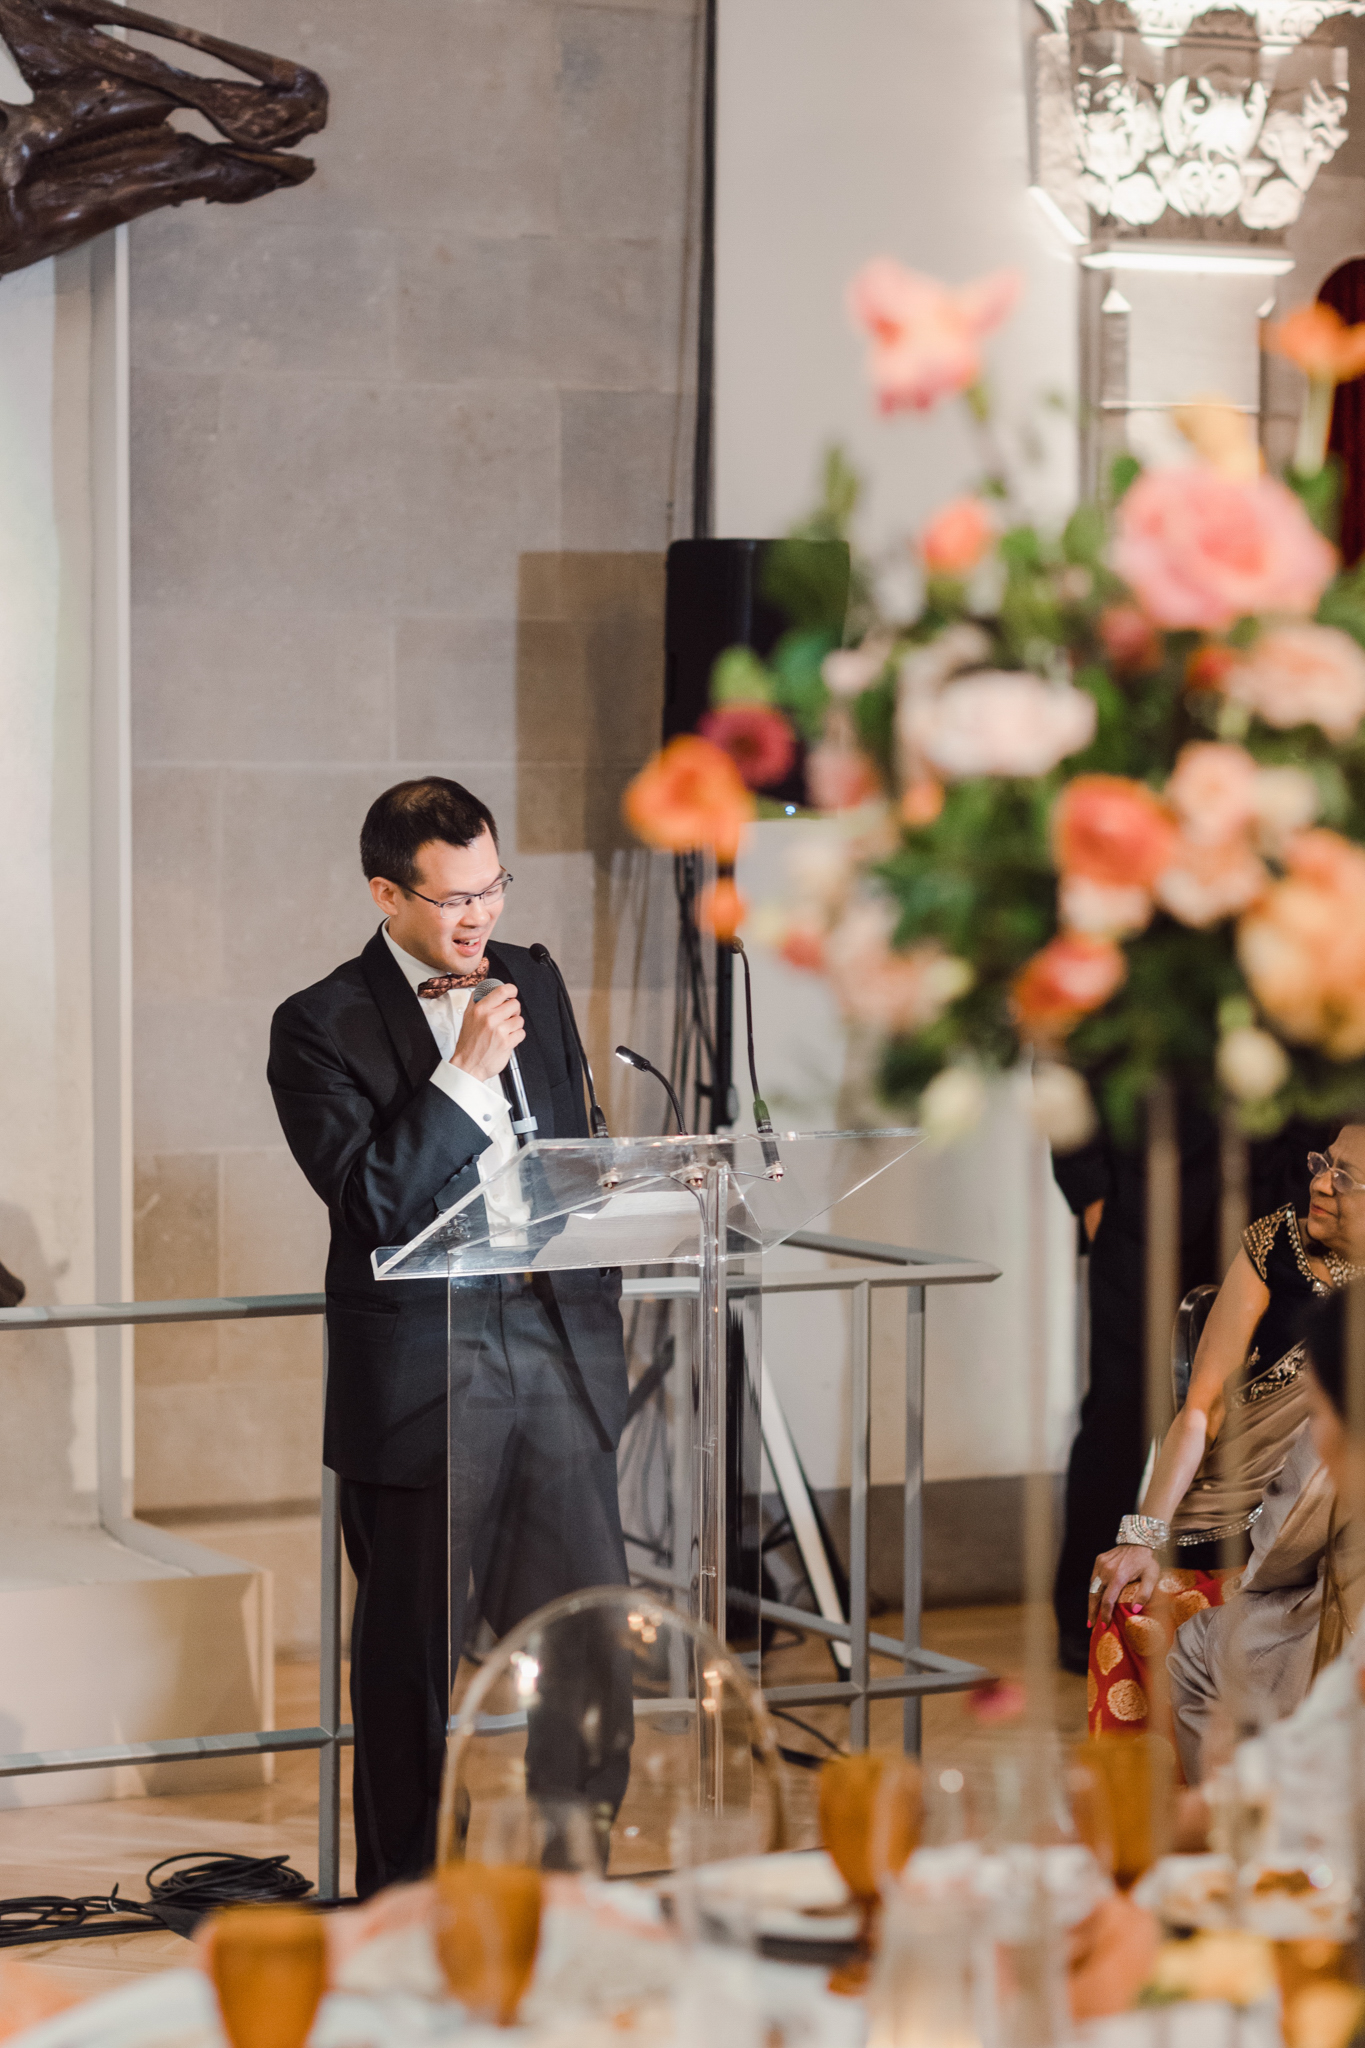 A Night at the Royal Ontario Museum-Themed Wedding